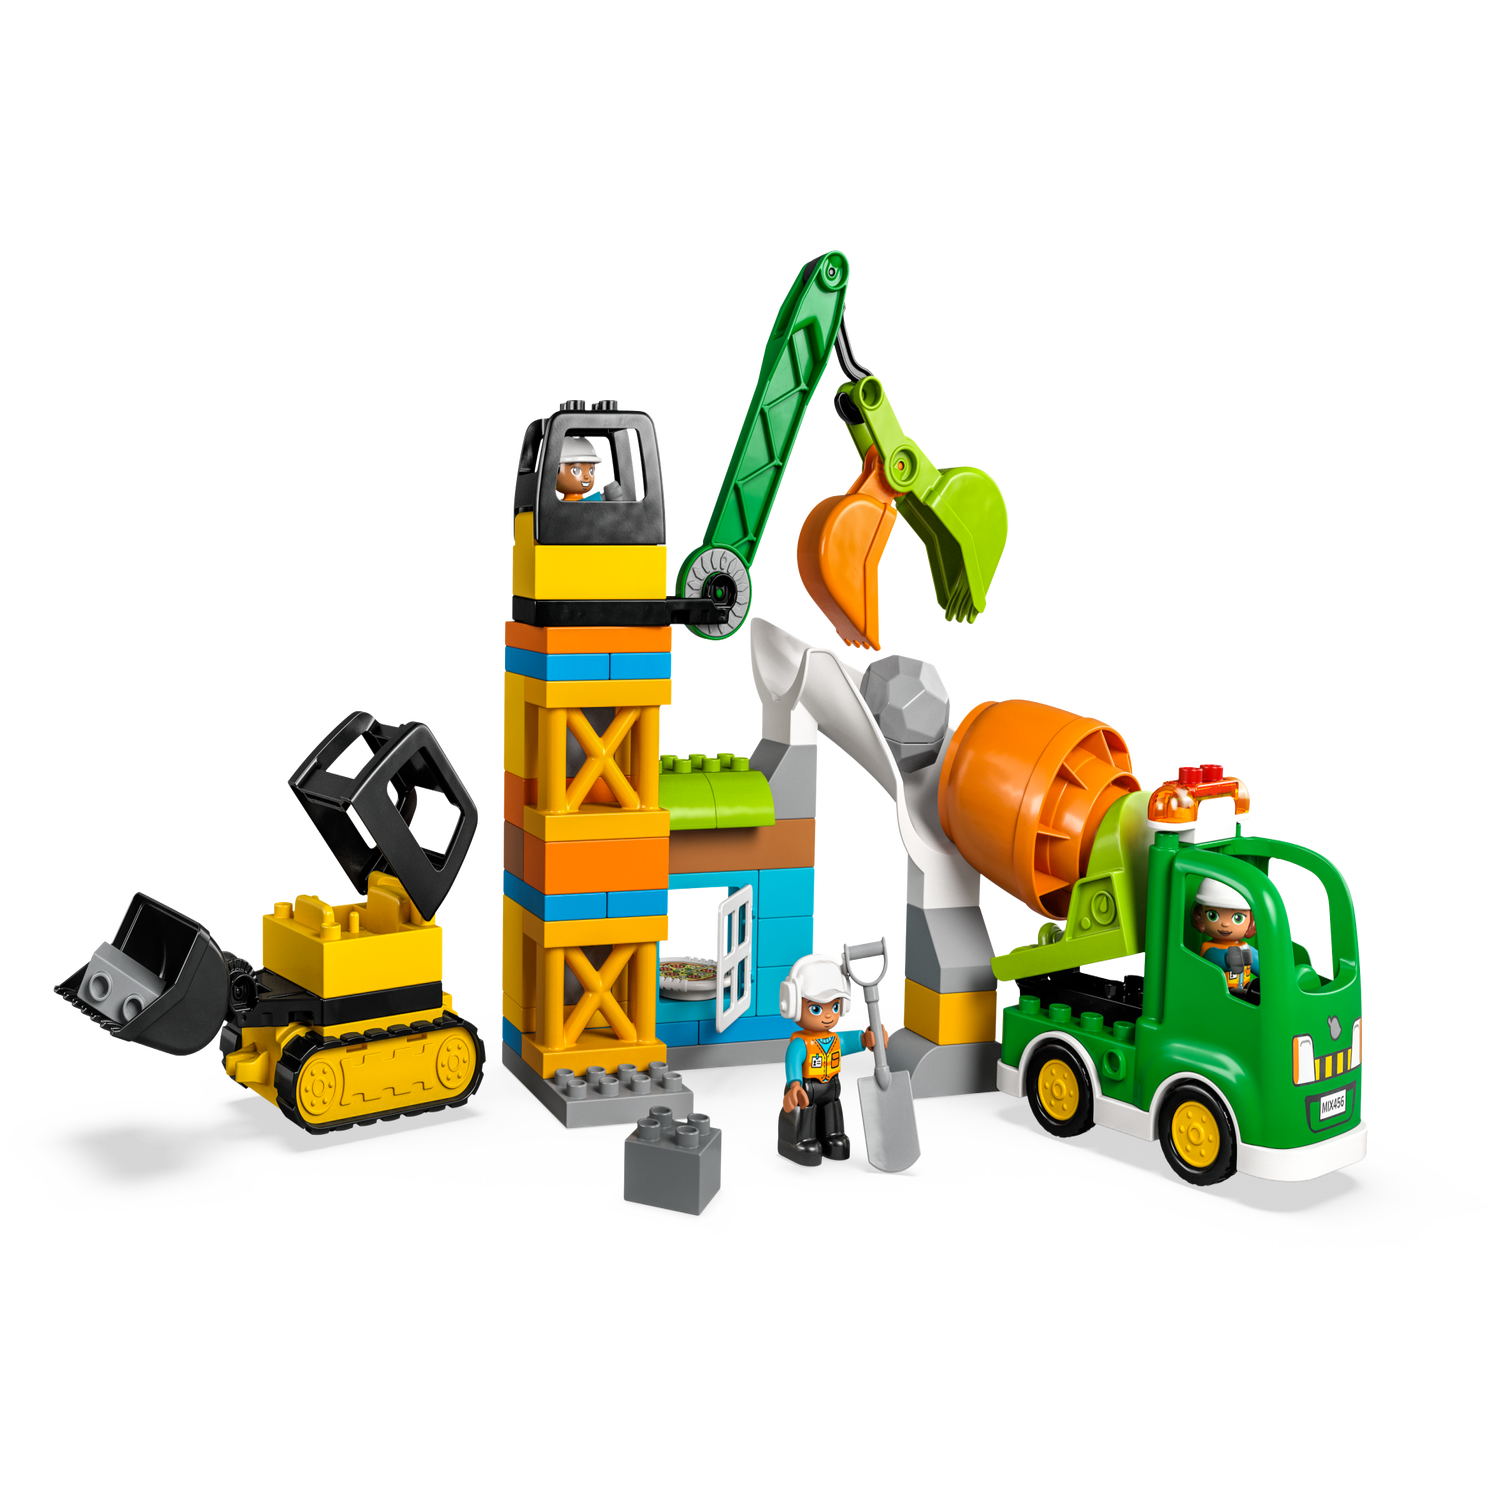 Construction Site 10990 | DUPLO® | Buy online at the Official LEGO® Shop US